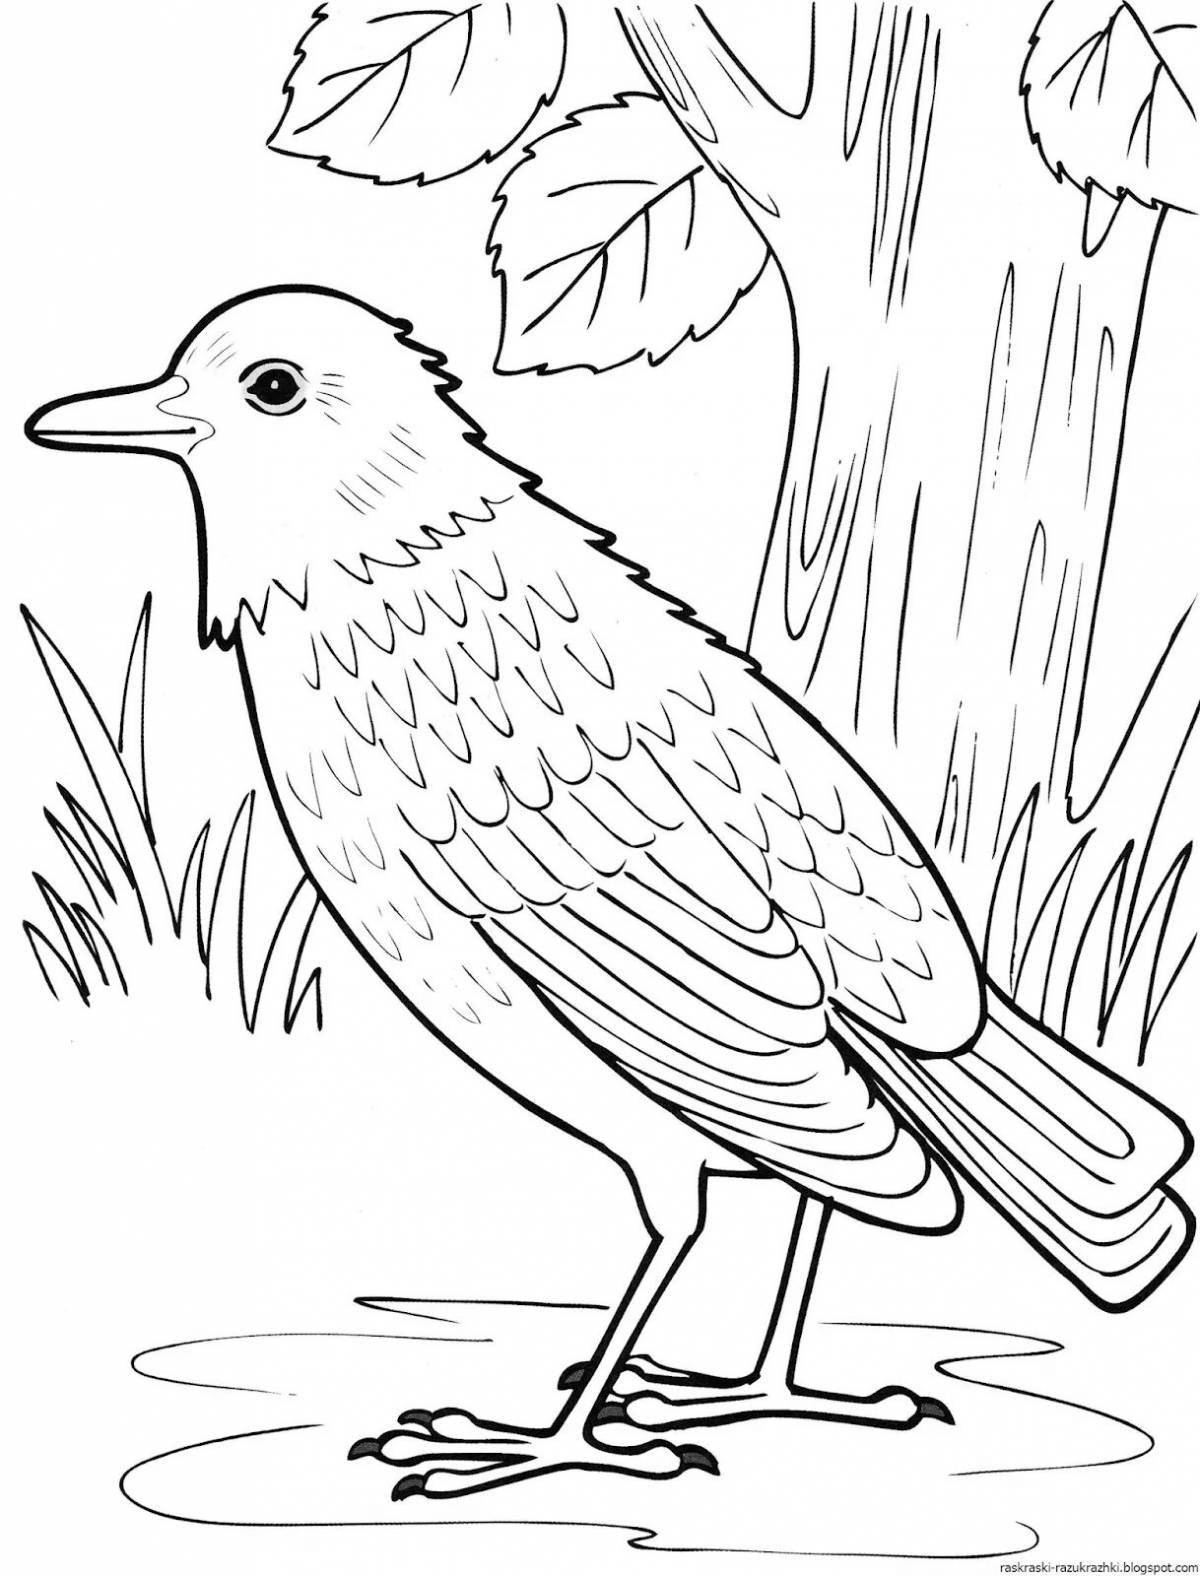 Coloring pages with cute migratory birds for 6-7 year olds